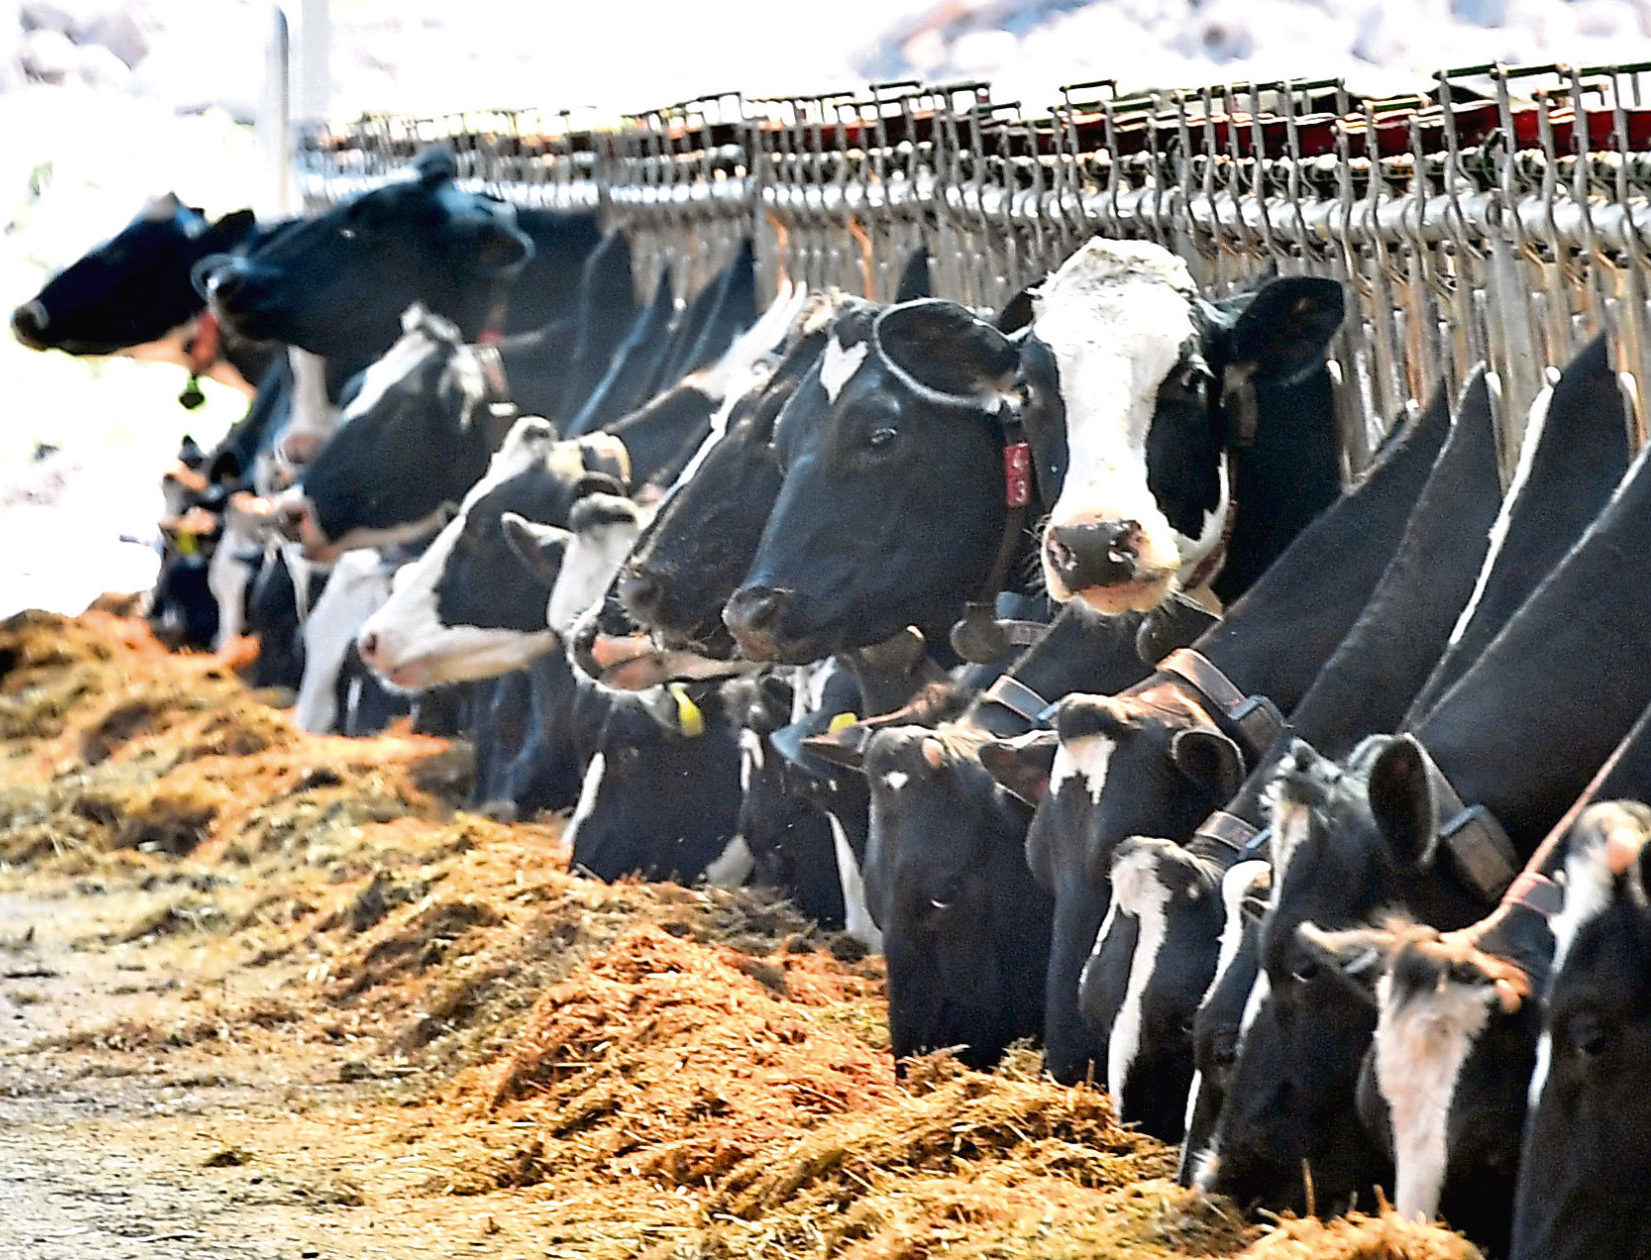 Change could be coming to the British dairy sector.